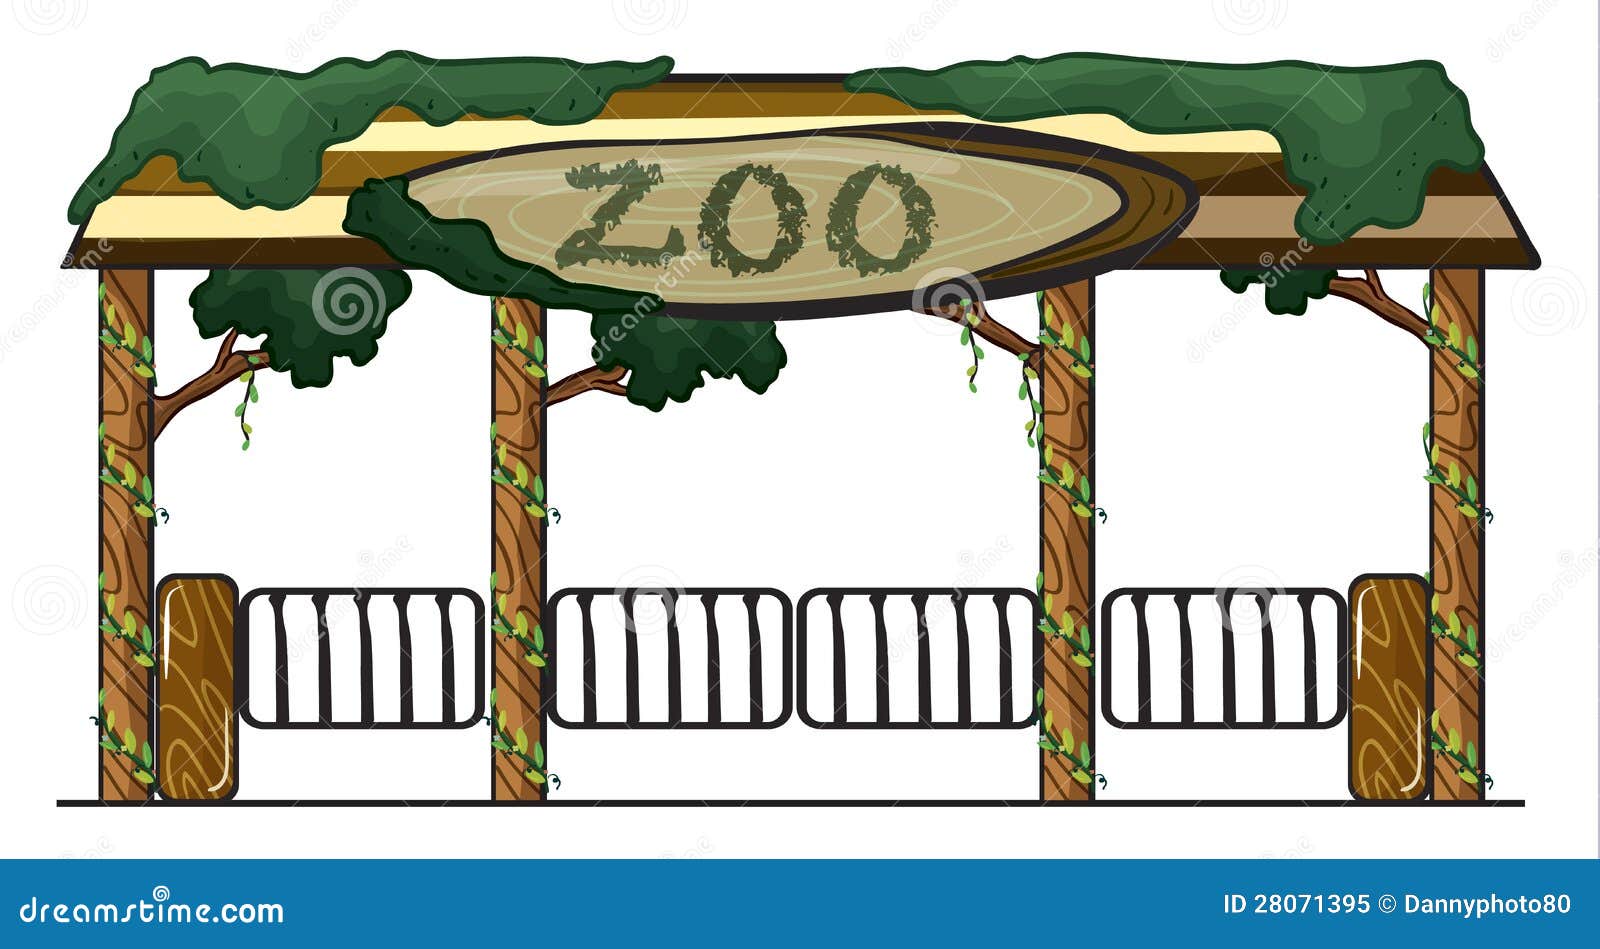 clipart zoo pictures - photo #36